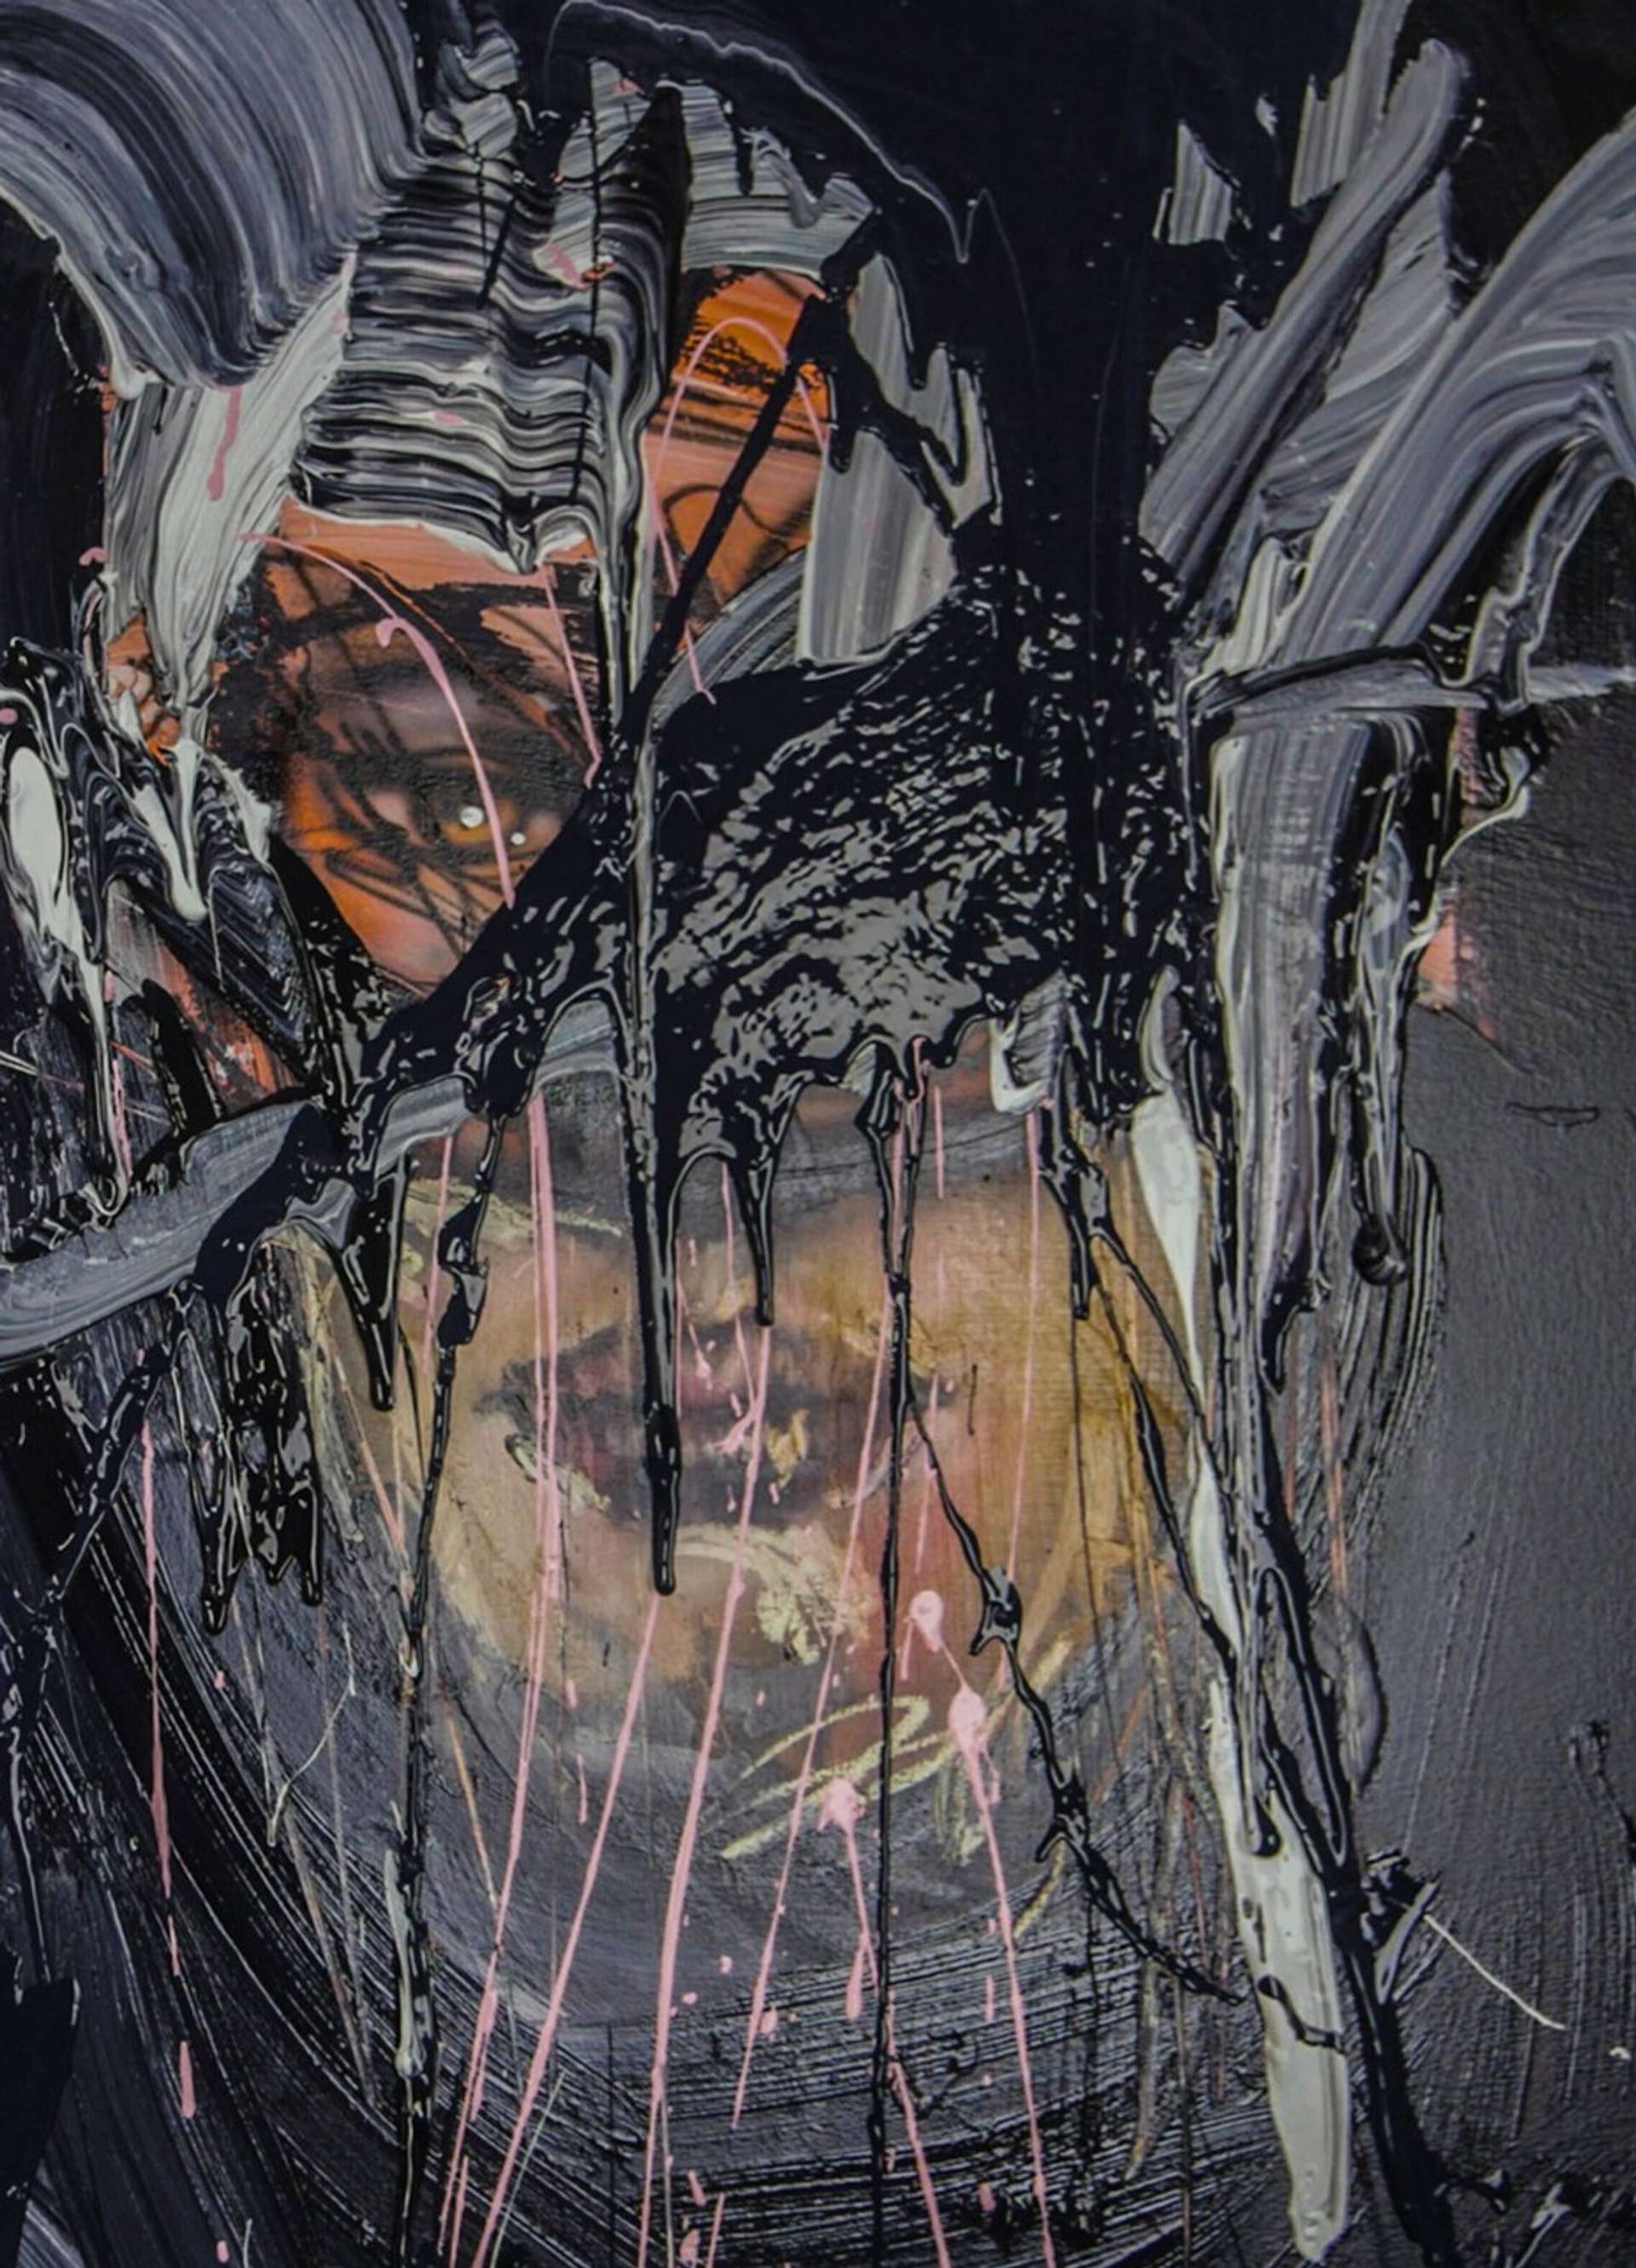 An image of the artwork Fist Hugger by artists David Choe and Rick Doblin, showing a female face obscured by large and thick splashes of black paint.